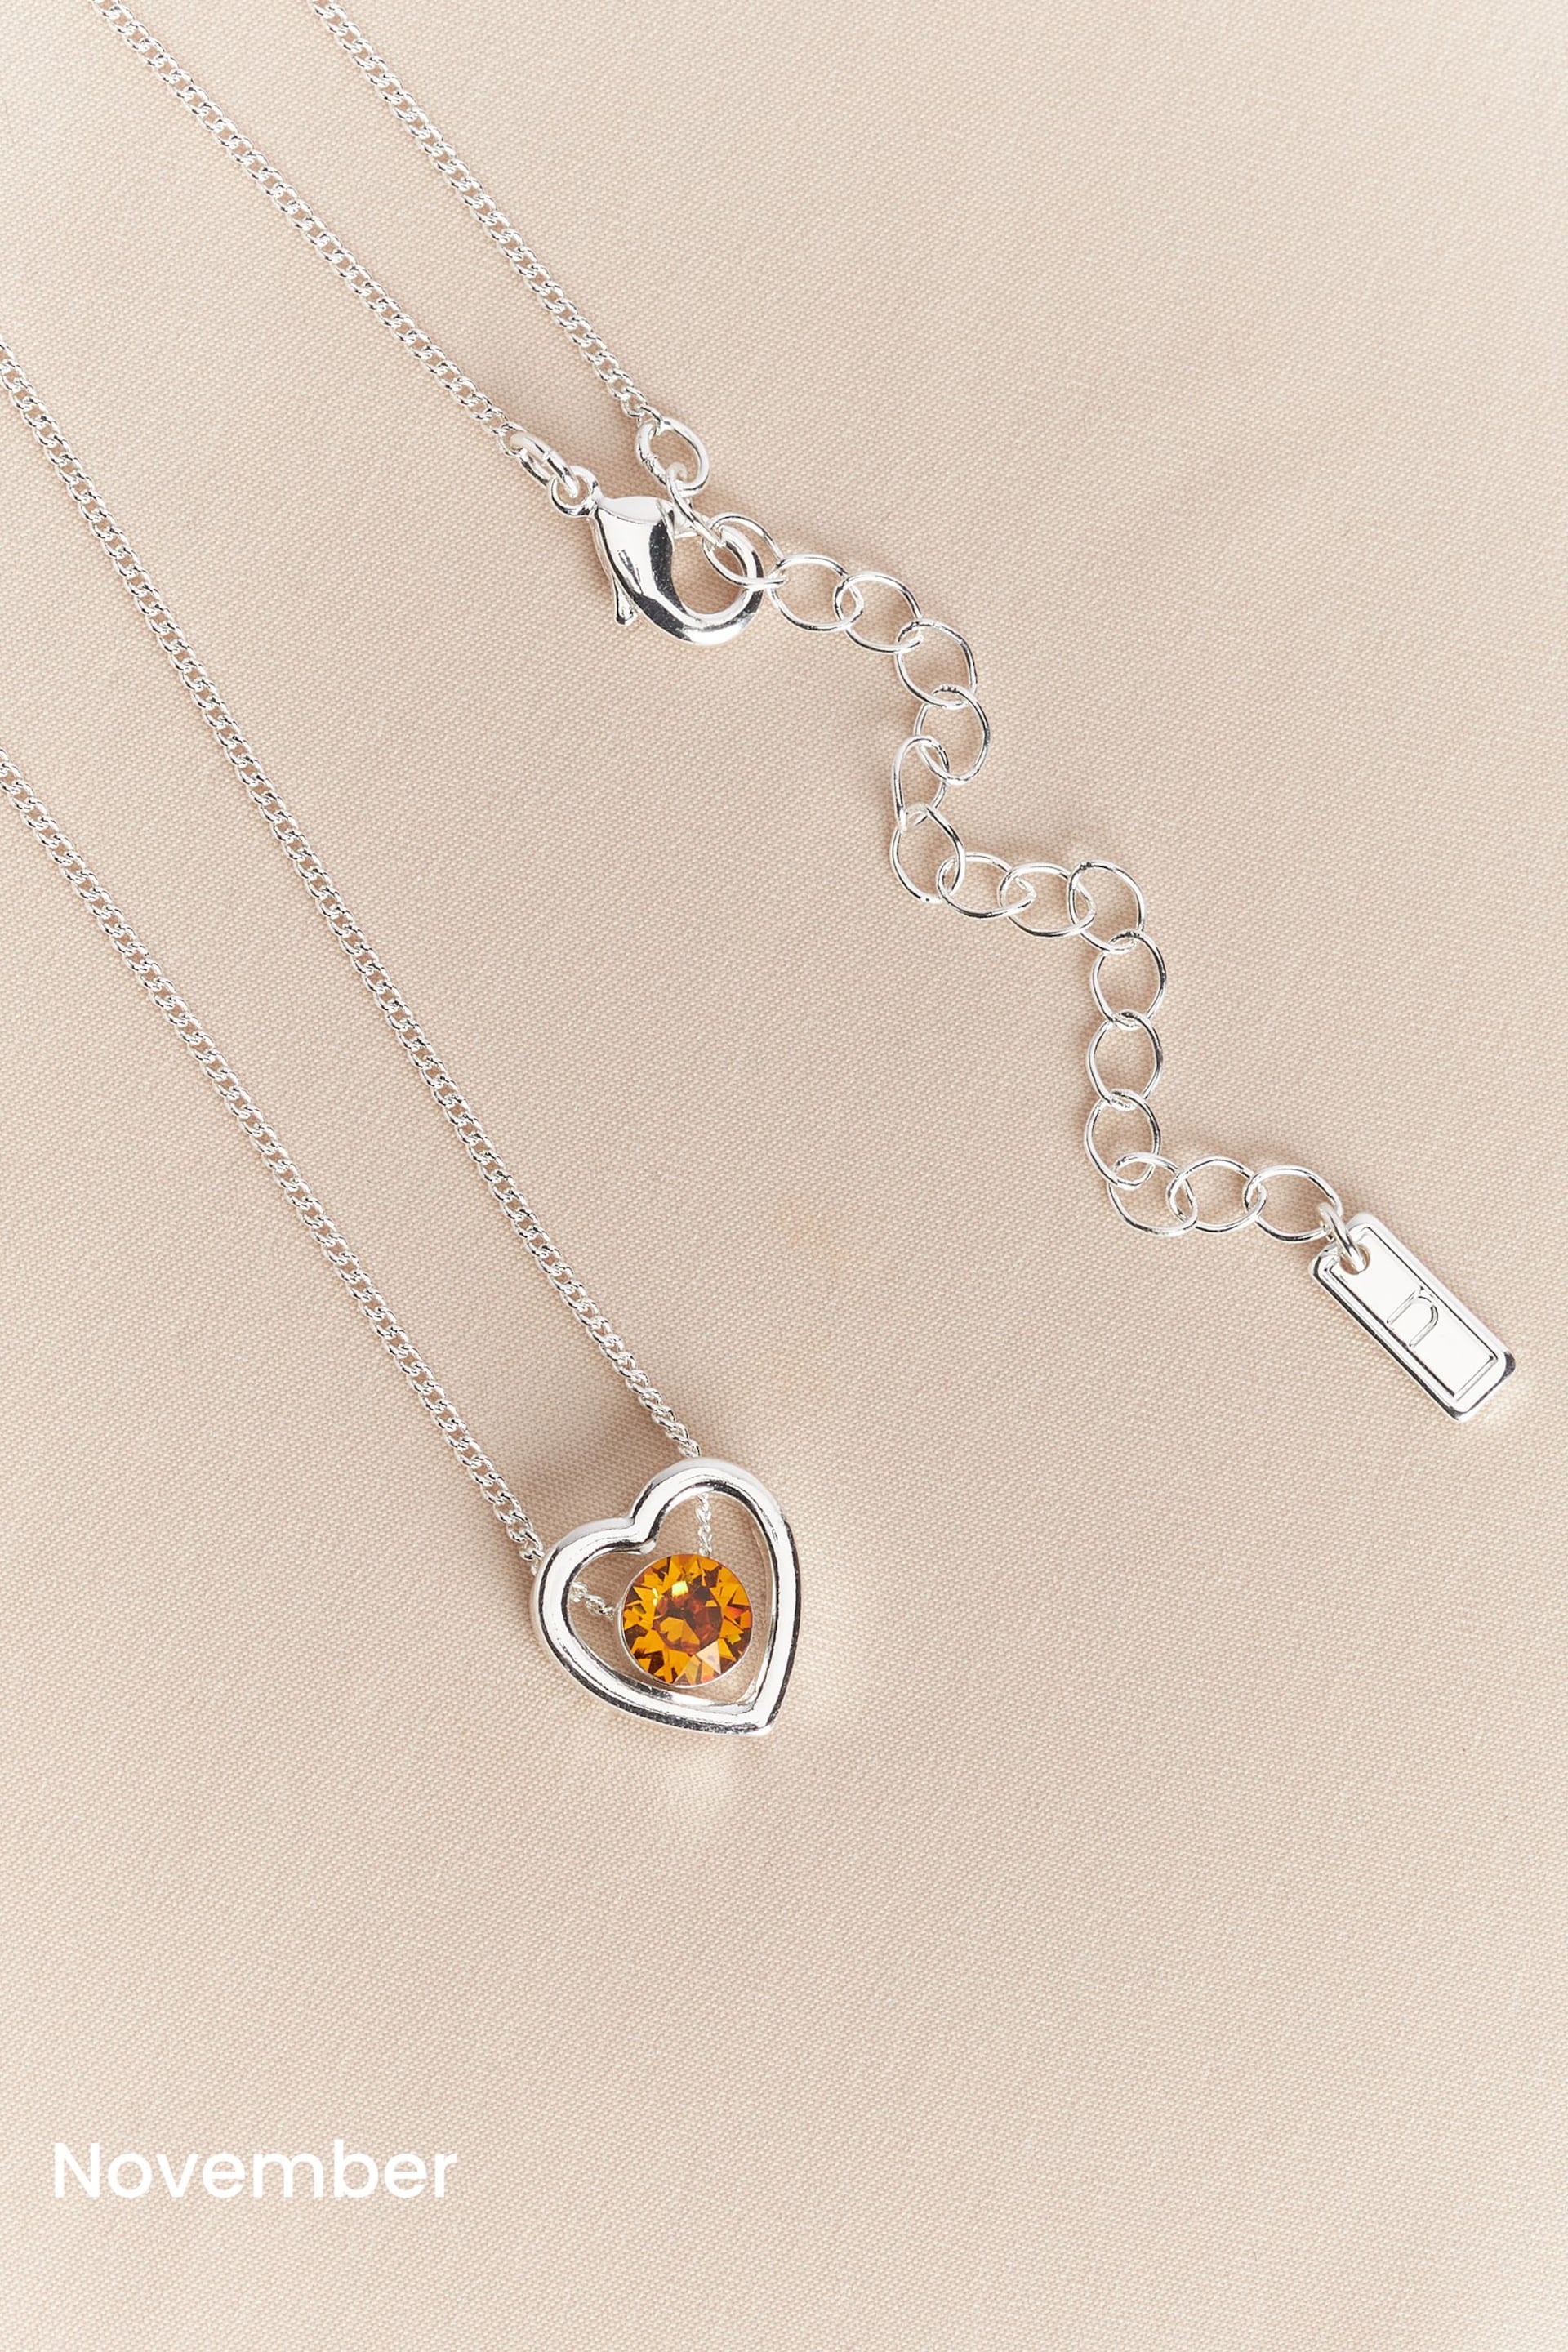 Silver Plated Heart Birthstone Necklace - Image 12 of 13